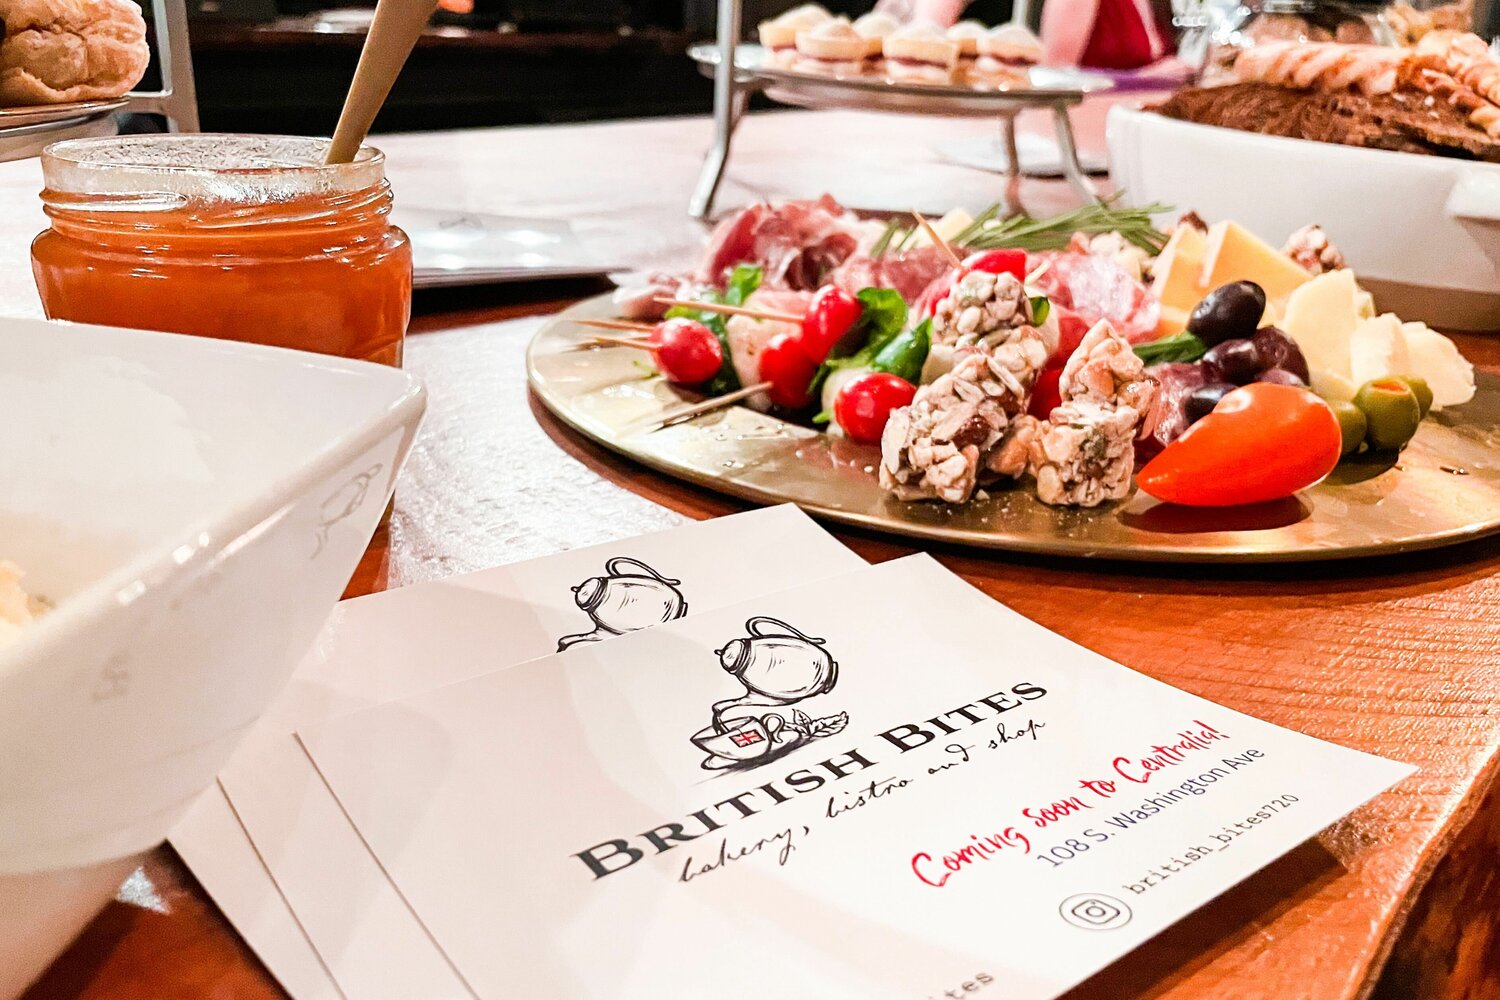 Food and flyers from British Bites, an eatery opening in Centralia on Saturday, are pictured at a catered event at the Juice Box last year.